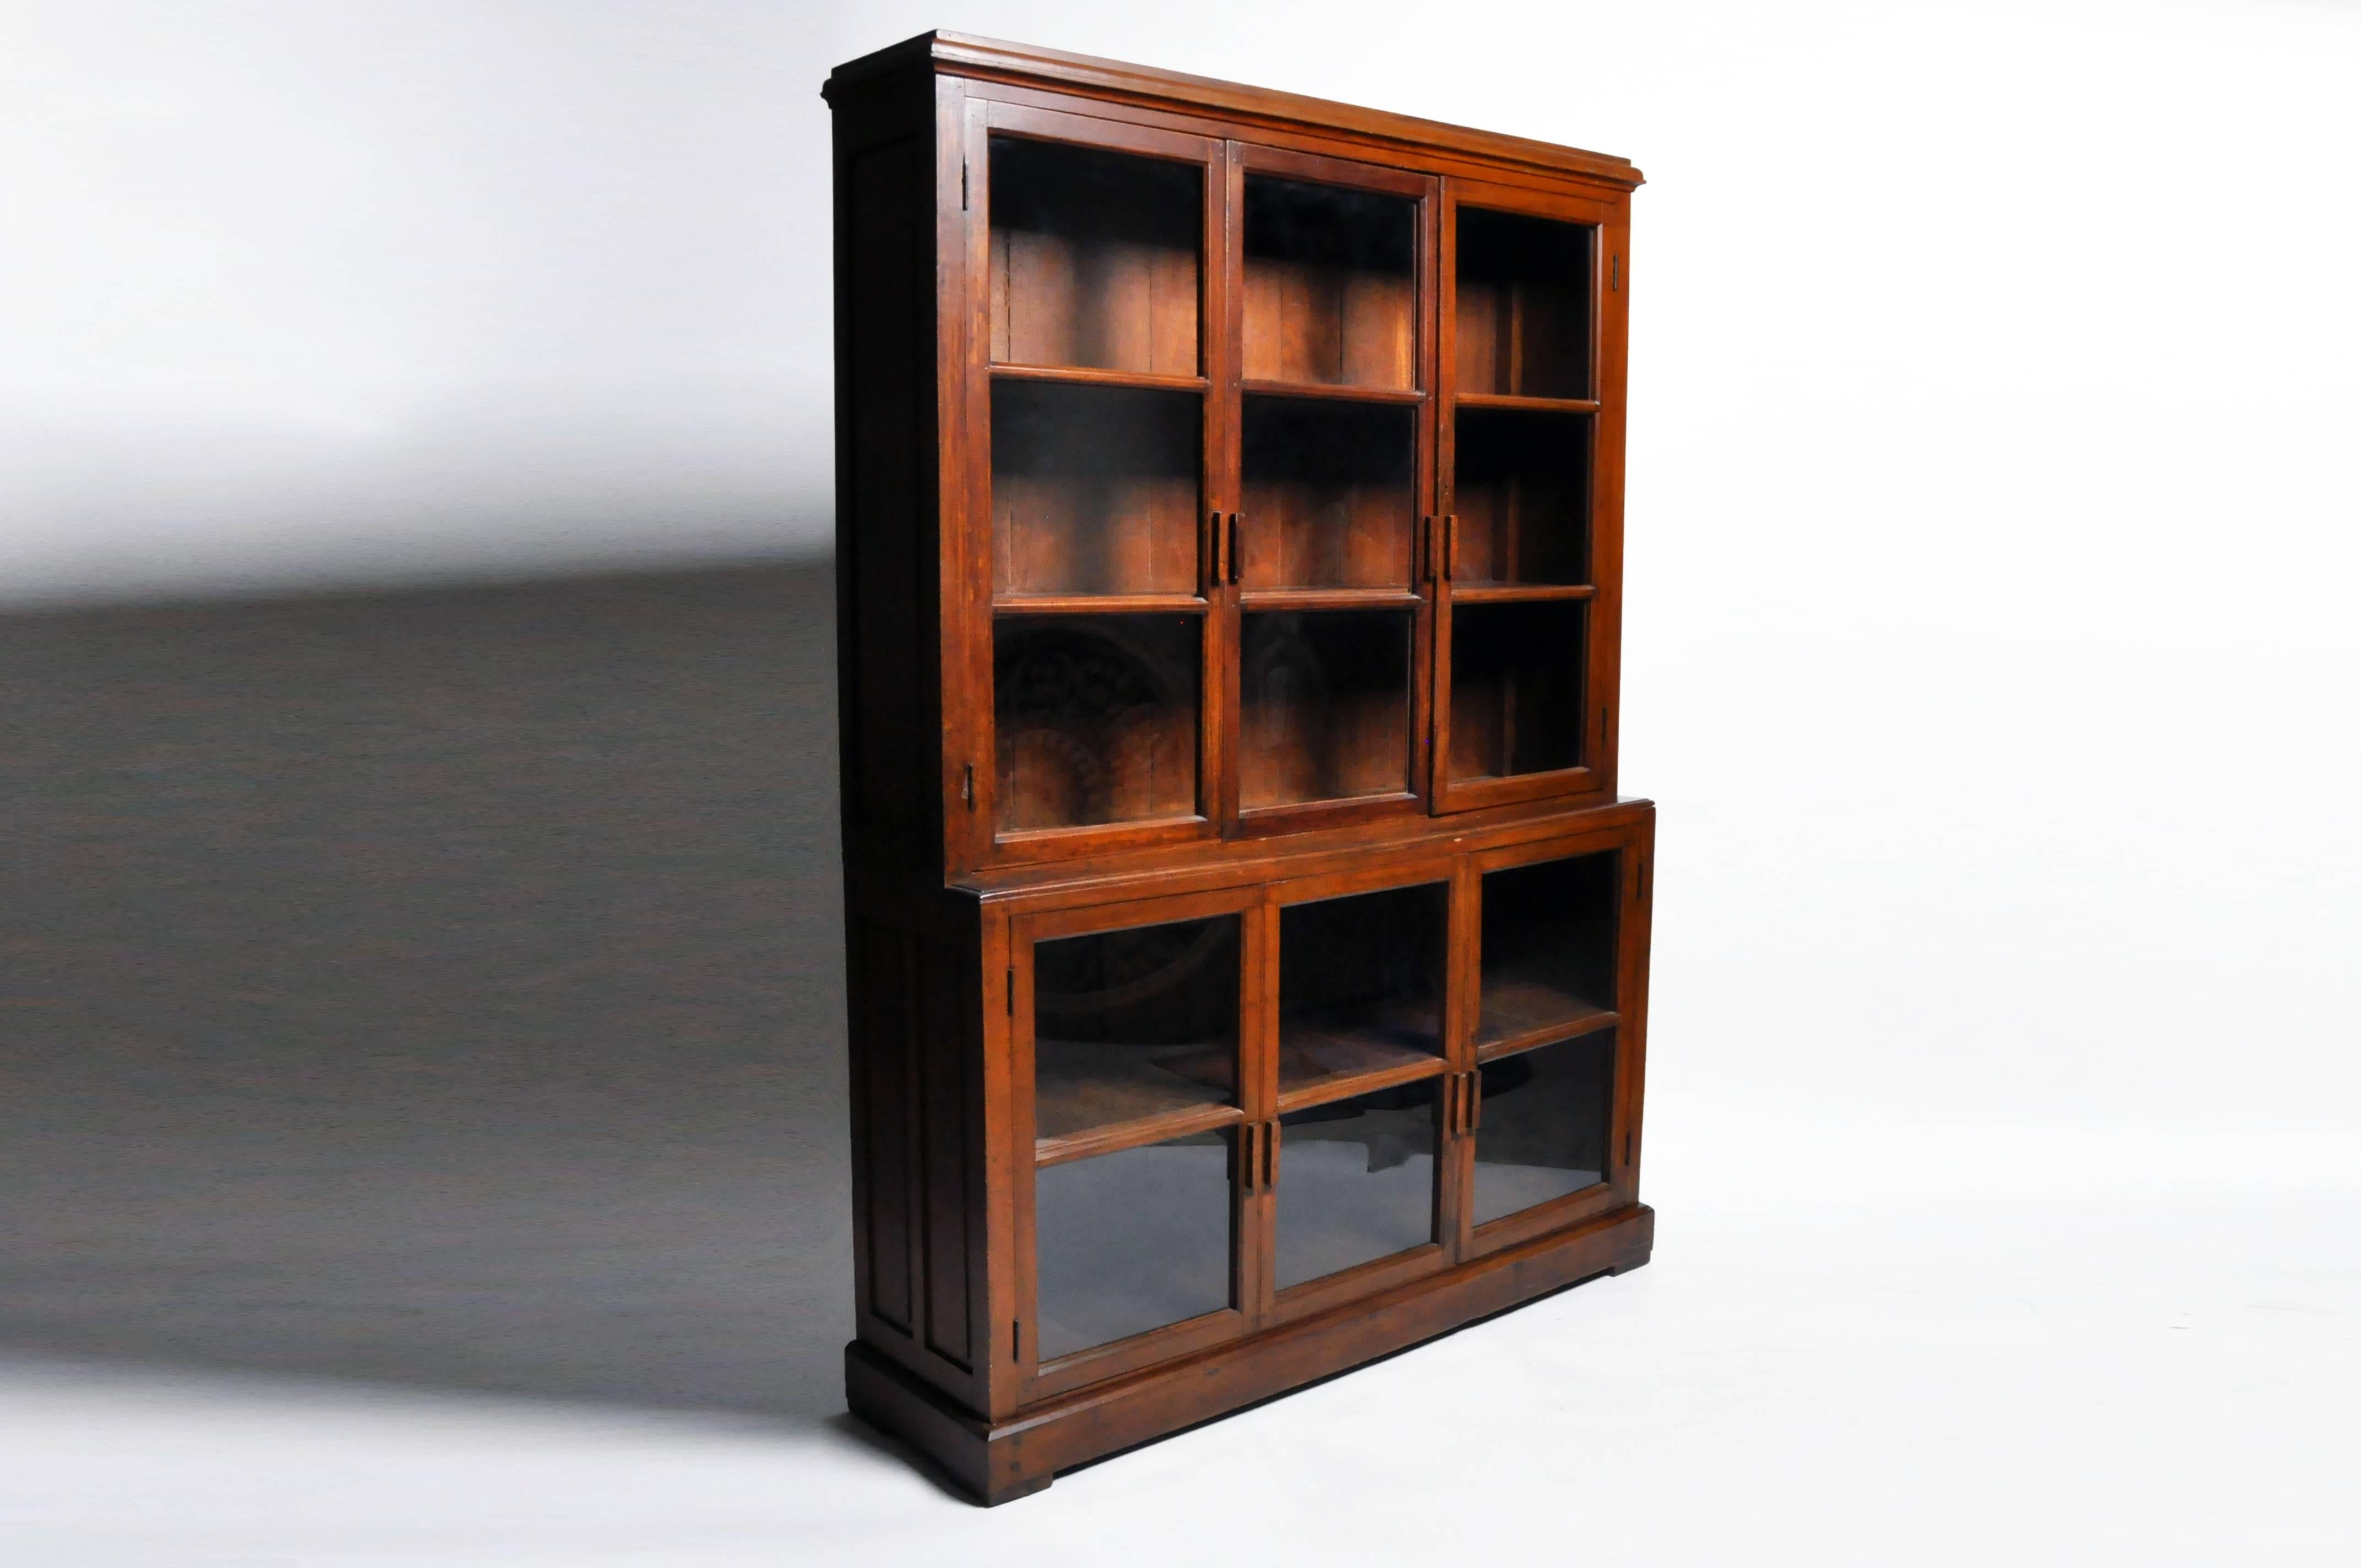 This British Colonial breakfront bookcase comes in two parts; both the top and bottom have two pairs of glass panel doors and one sliding door that opens up to compartments lined with shelves. It's scale and ample storage make this a perfect book